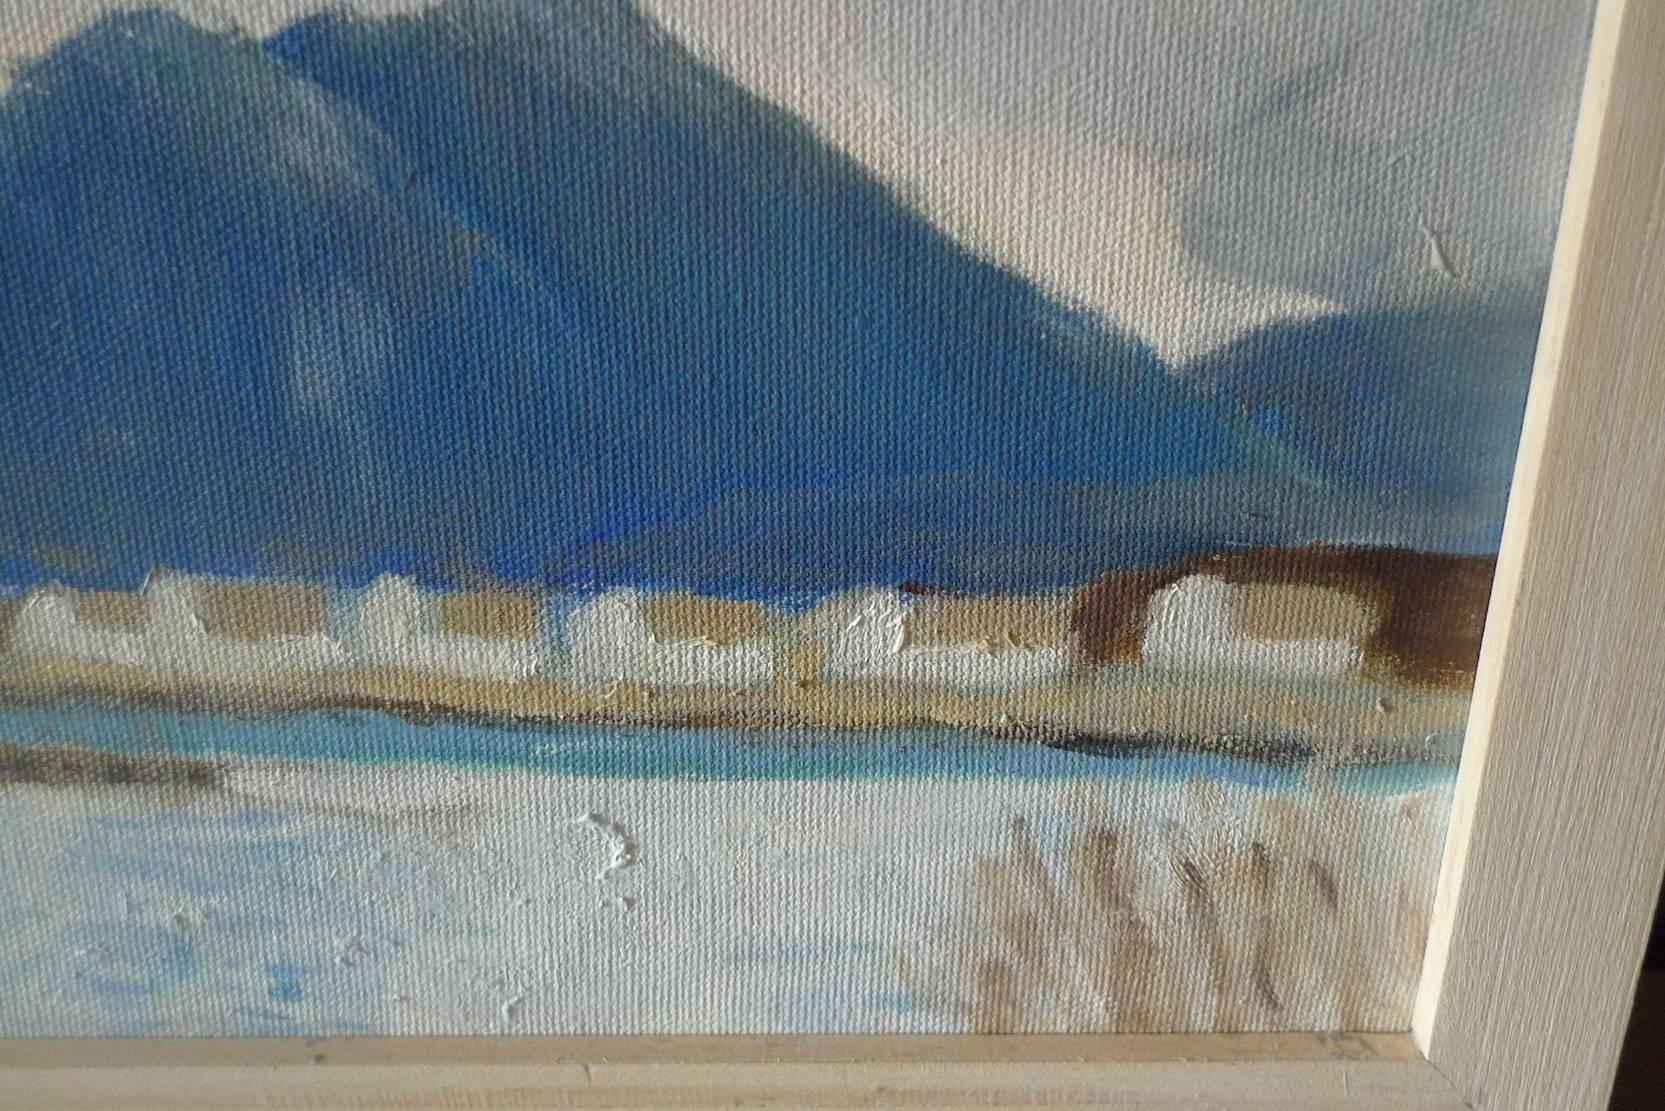 Achill Island Paint on Canvas by B ONeill 1